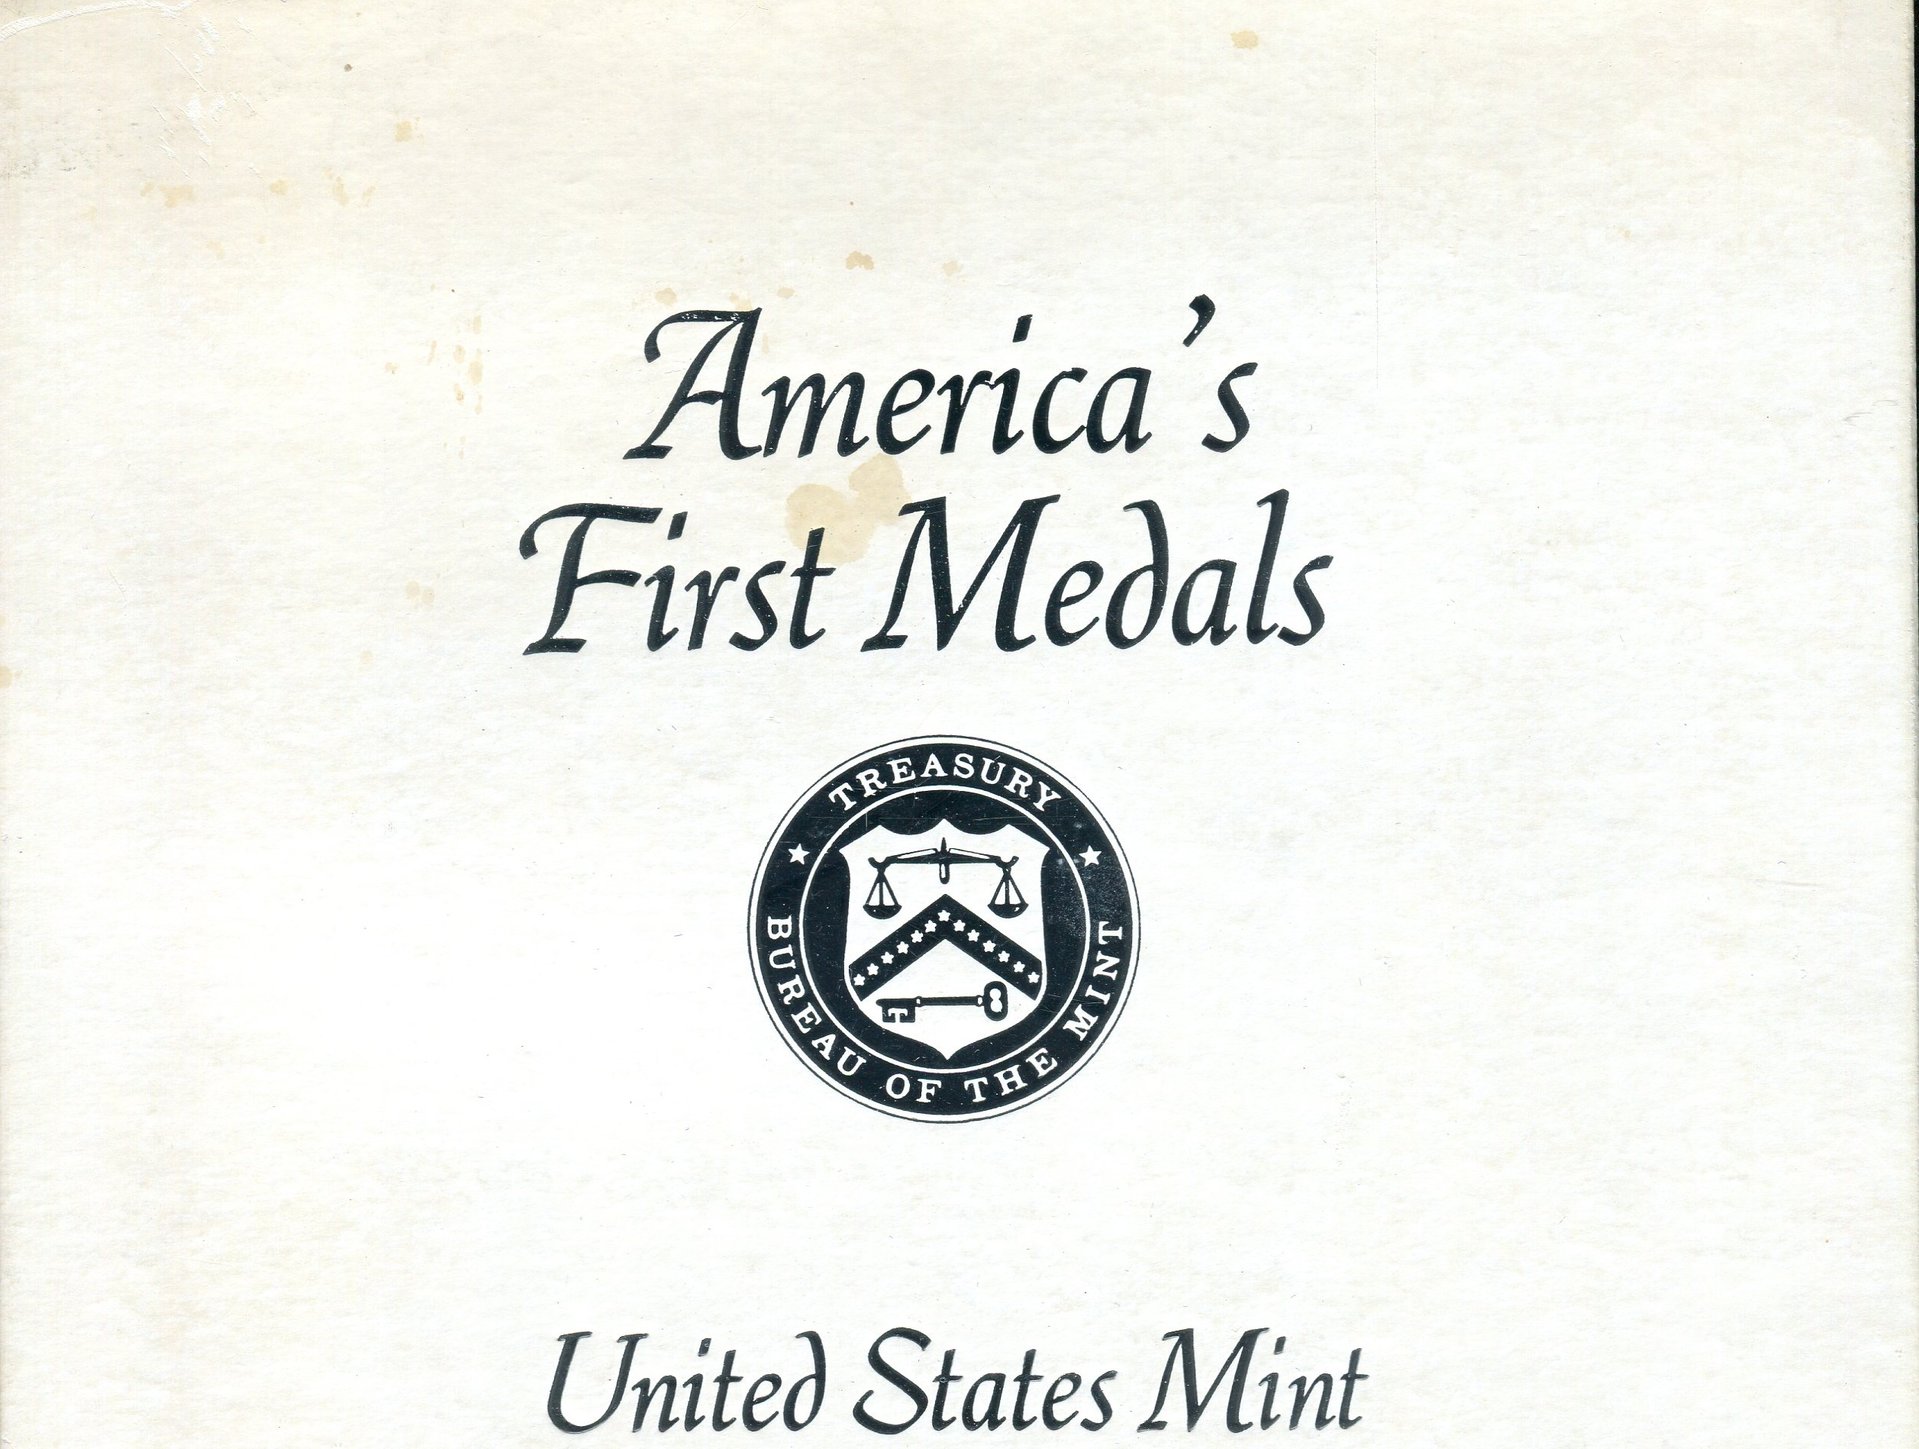 America's First Medals 1.jpg